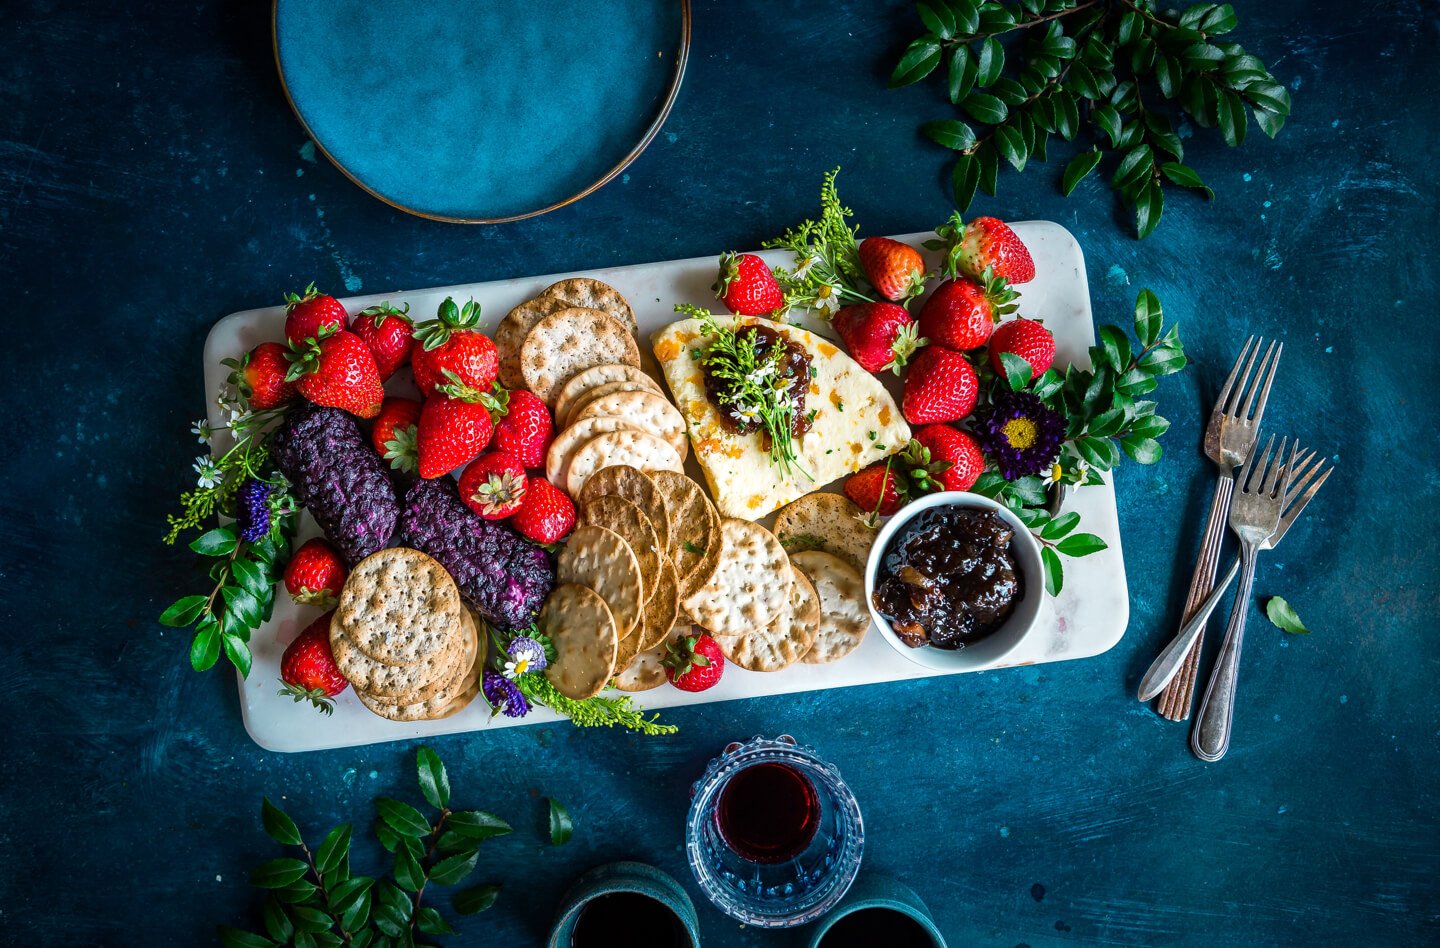 Summer Cheese Platter with Berries, Crackers and Wine